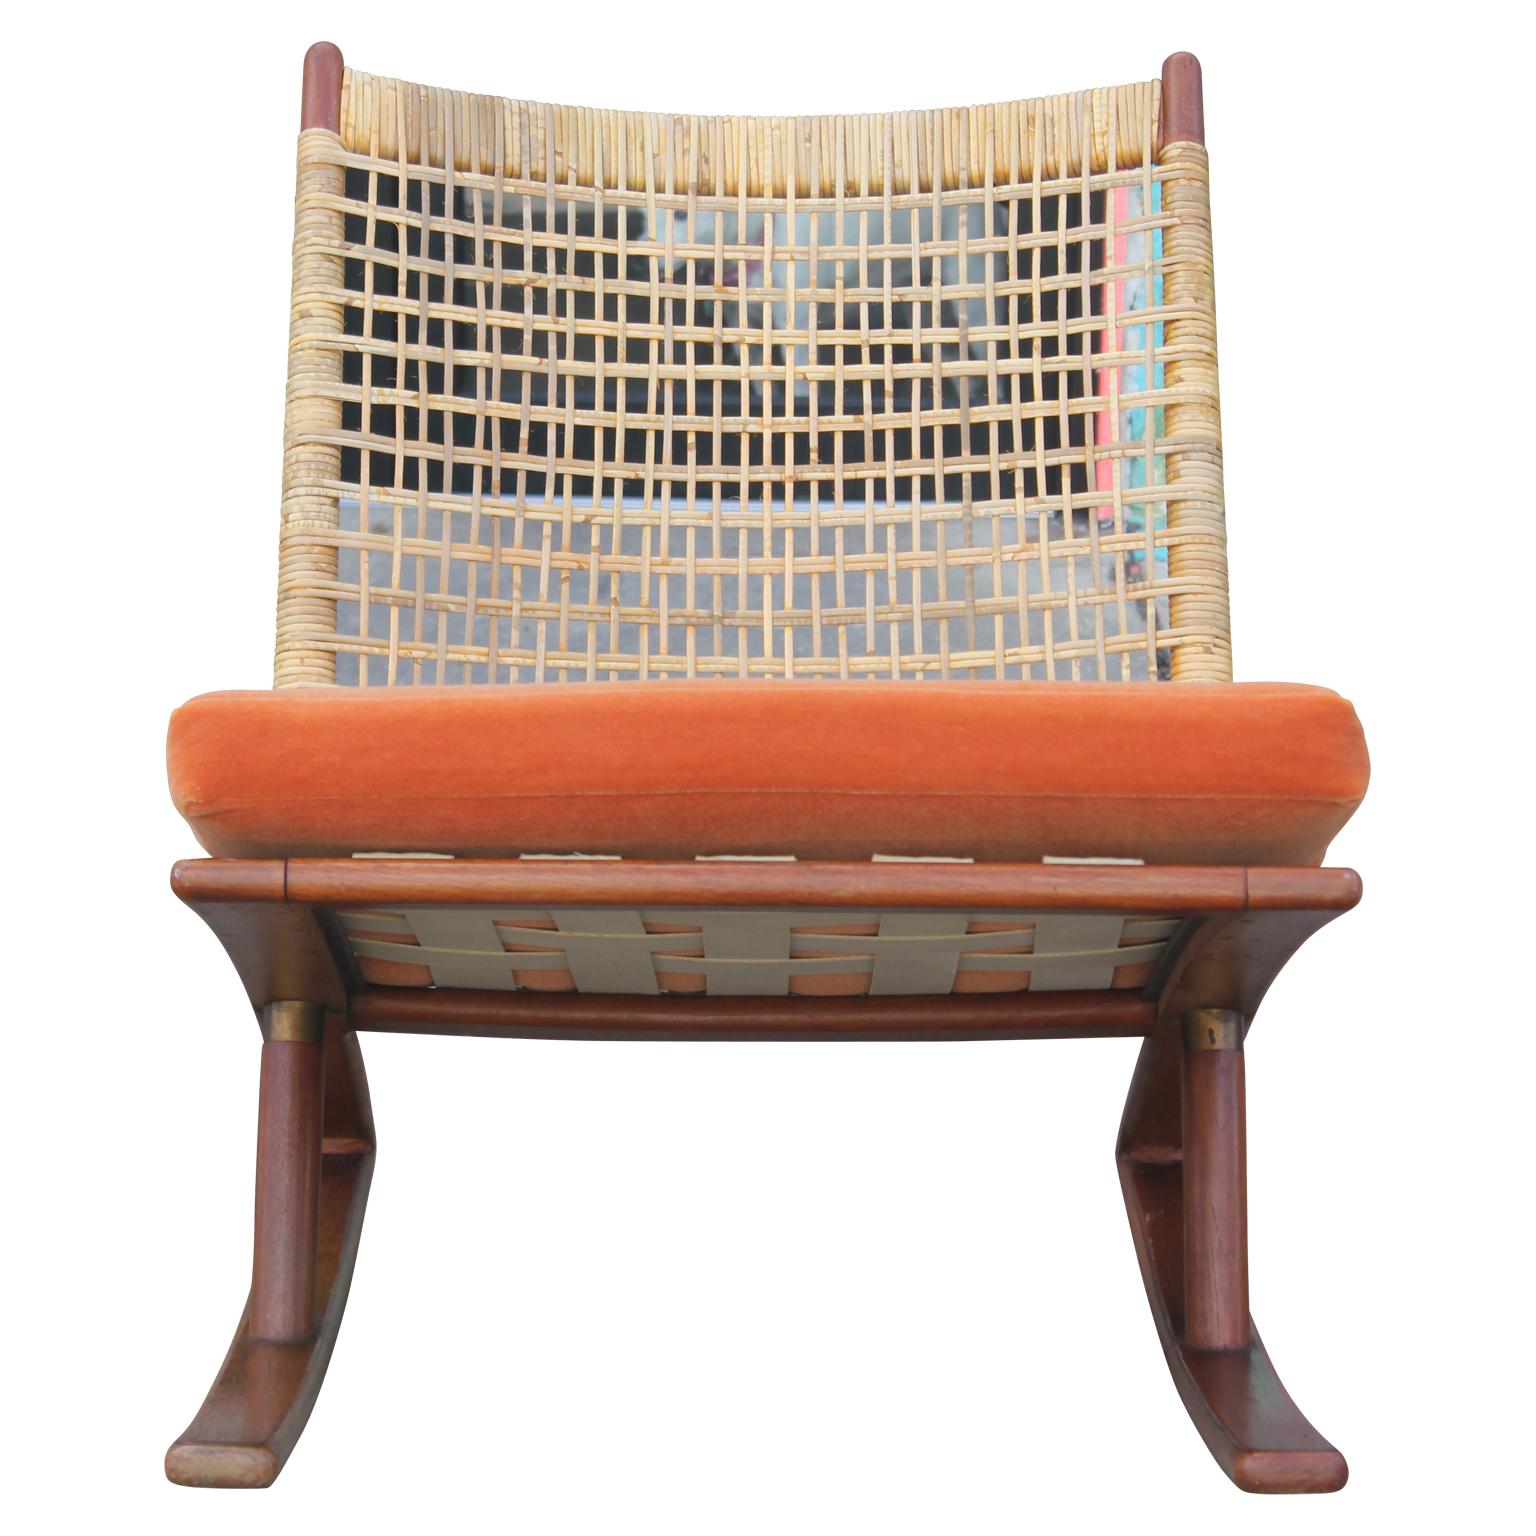 Mid-Century Modern teak rocking chair by Fredrik Kayser with a cane back and leather strapping for the seat. 